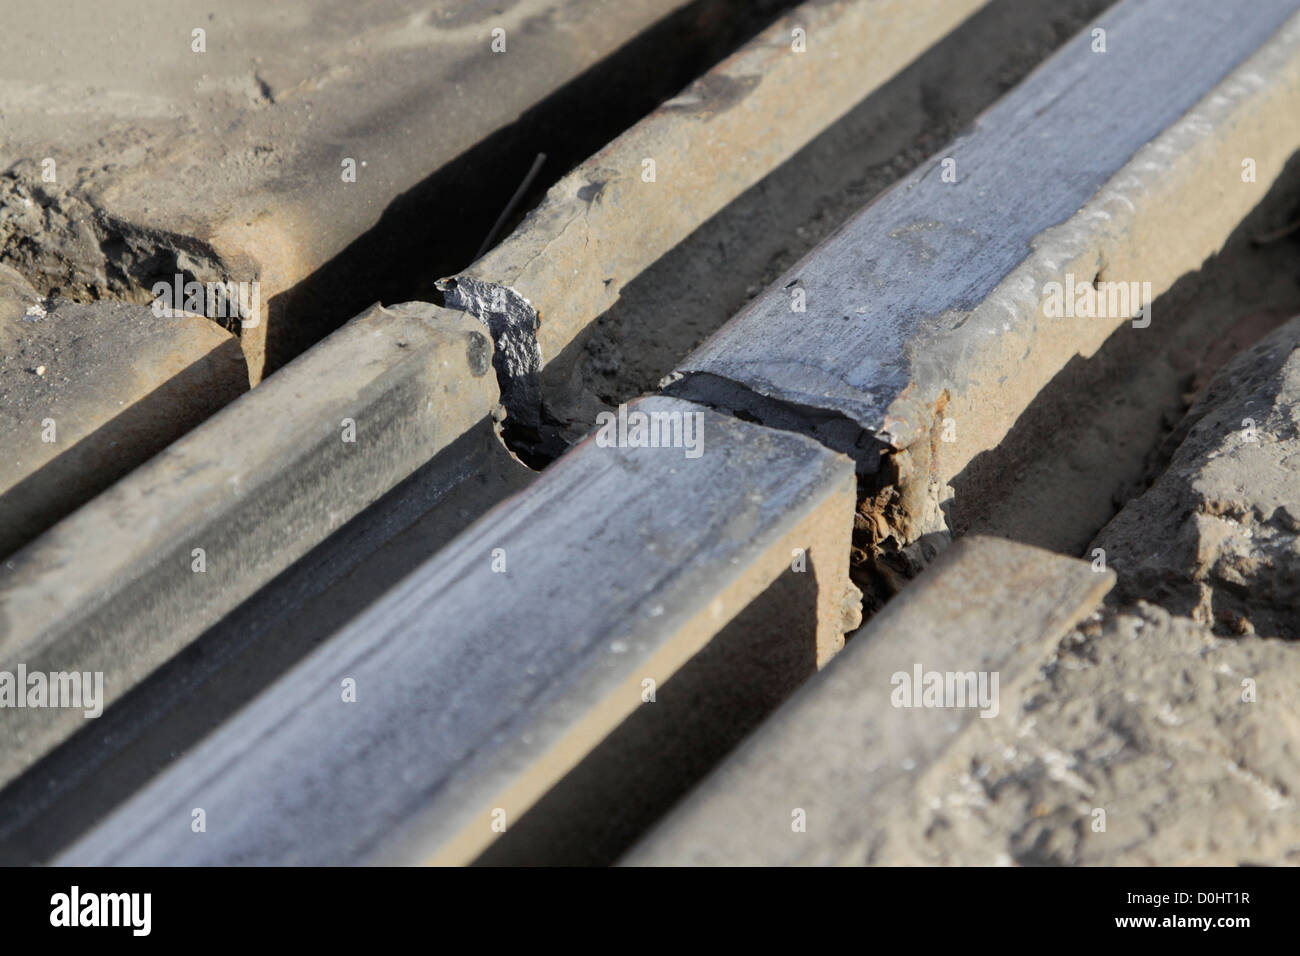 Unsafe tramway system in Sofia: broken rail. Damages remain largely unnoticed and are not repaired for months. Stock Photo